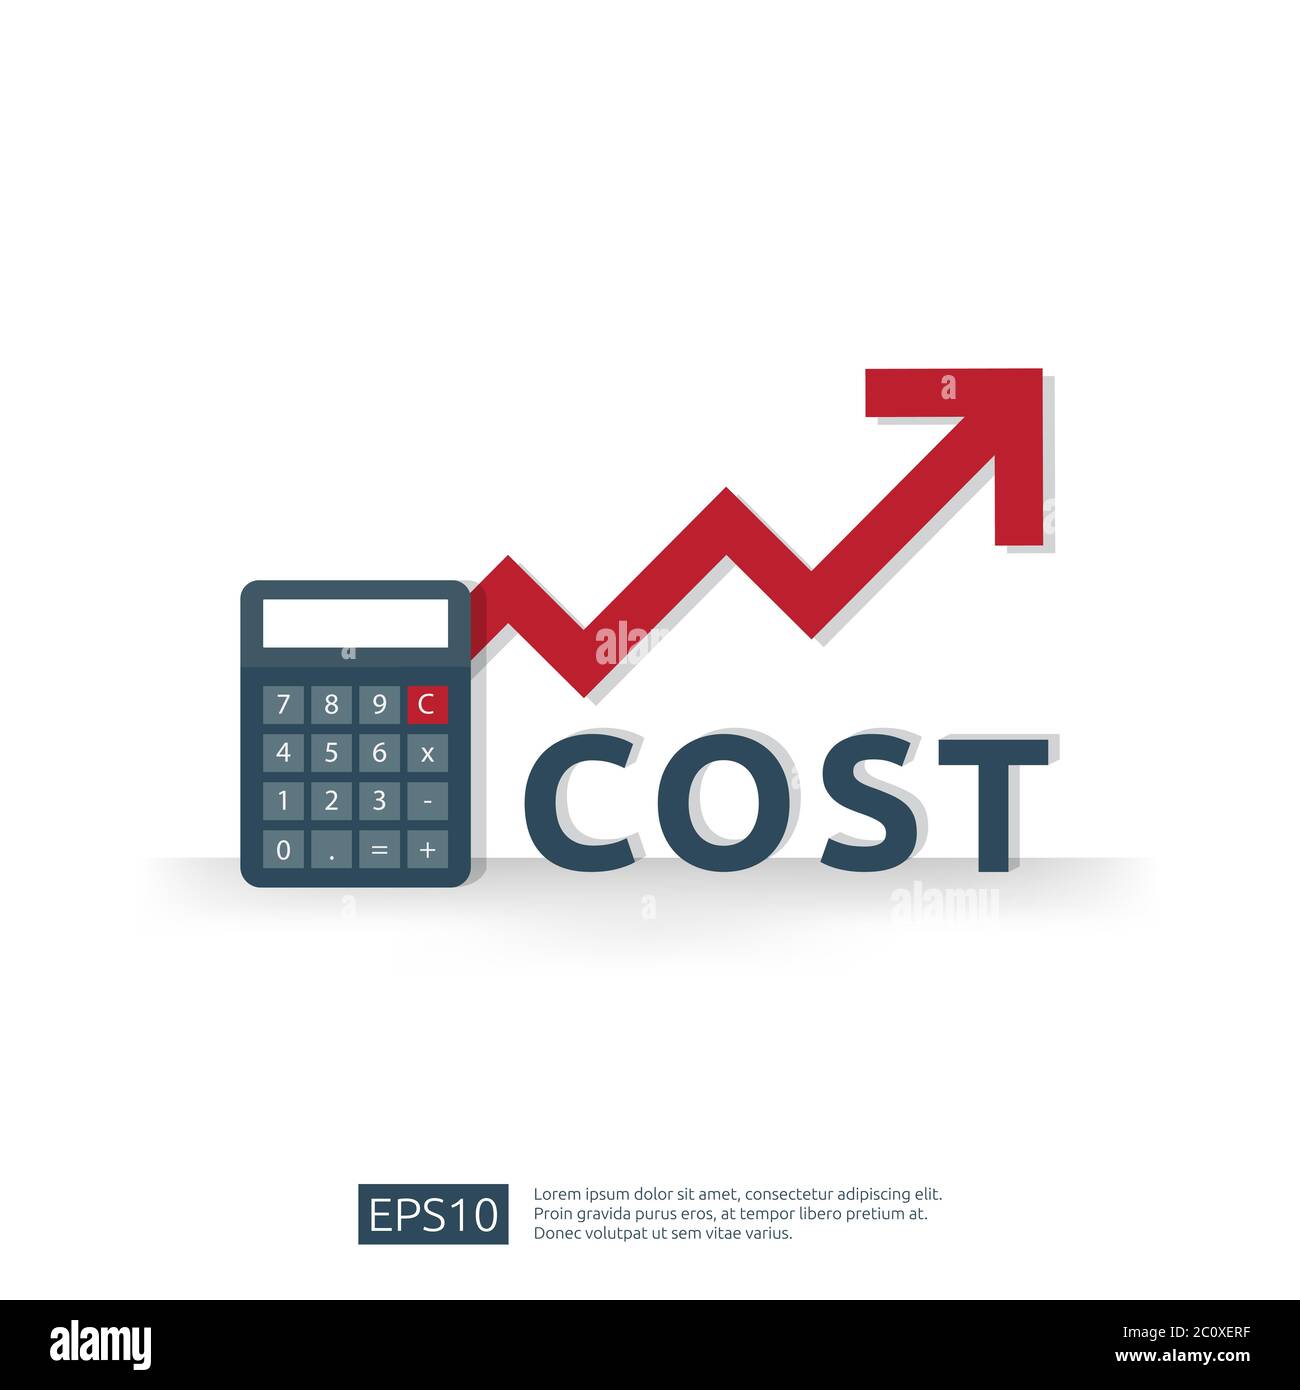 cost fee spending increase with red arrow rising up growth diagram. business cash reduction concept. investment growth progress with calculator elemen Stock Vector